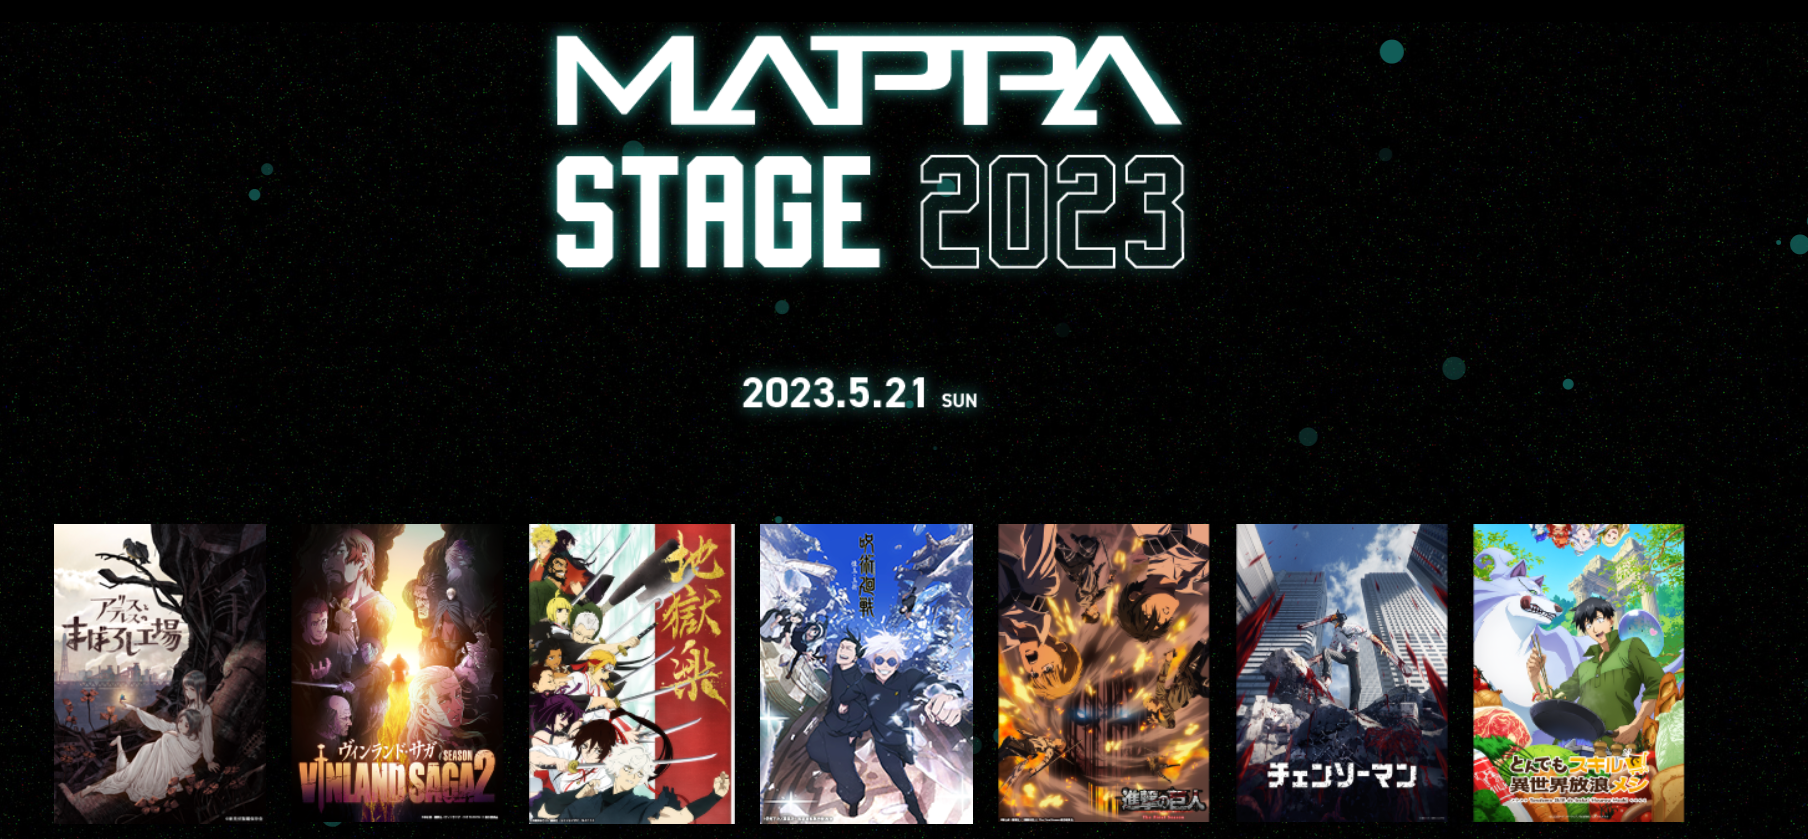 MAPPA Stage 2023